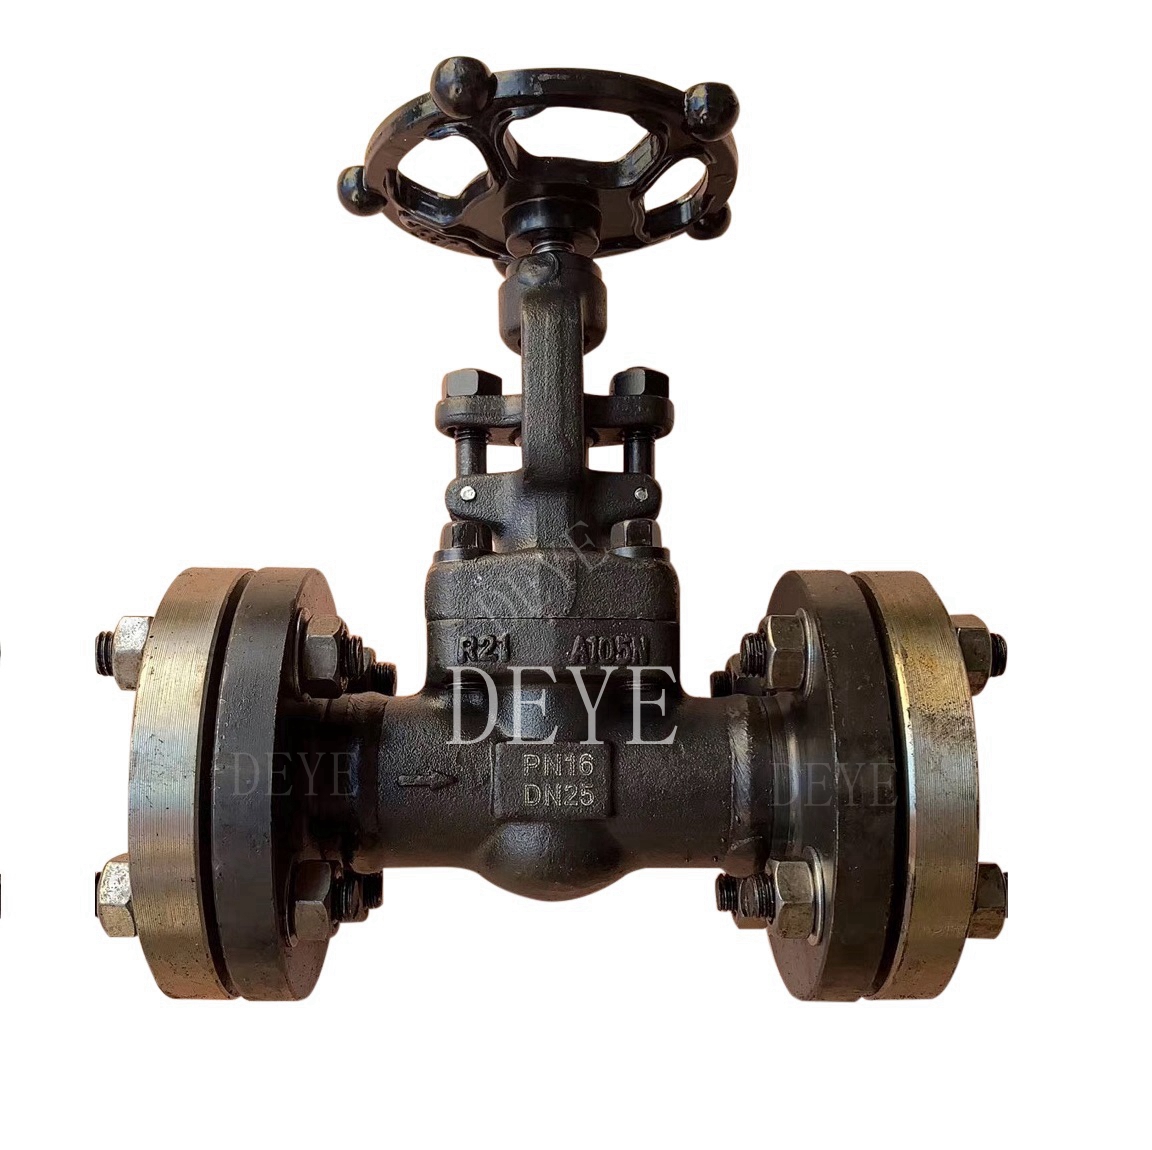 OEM/ODM China 900lbs Lug Check Valve -
 A105 Forged steel Gate Valve with counter flanges GVC-0016-1F – Deye